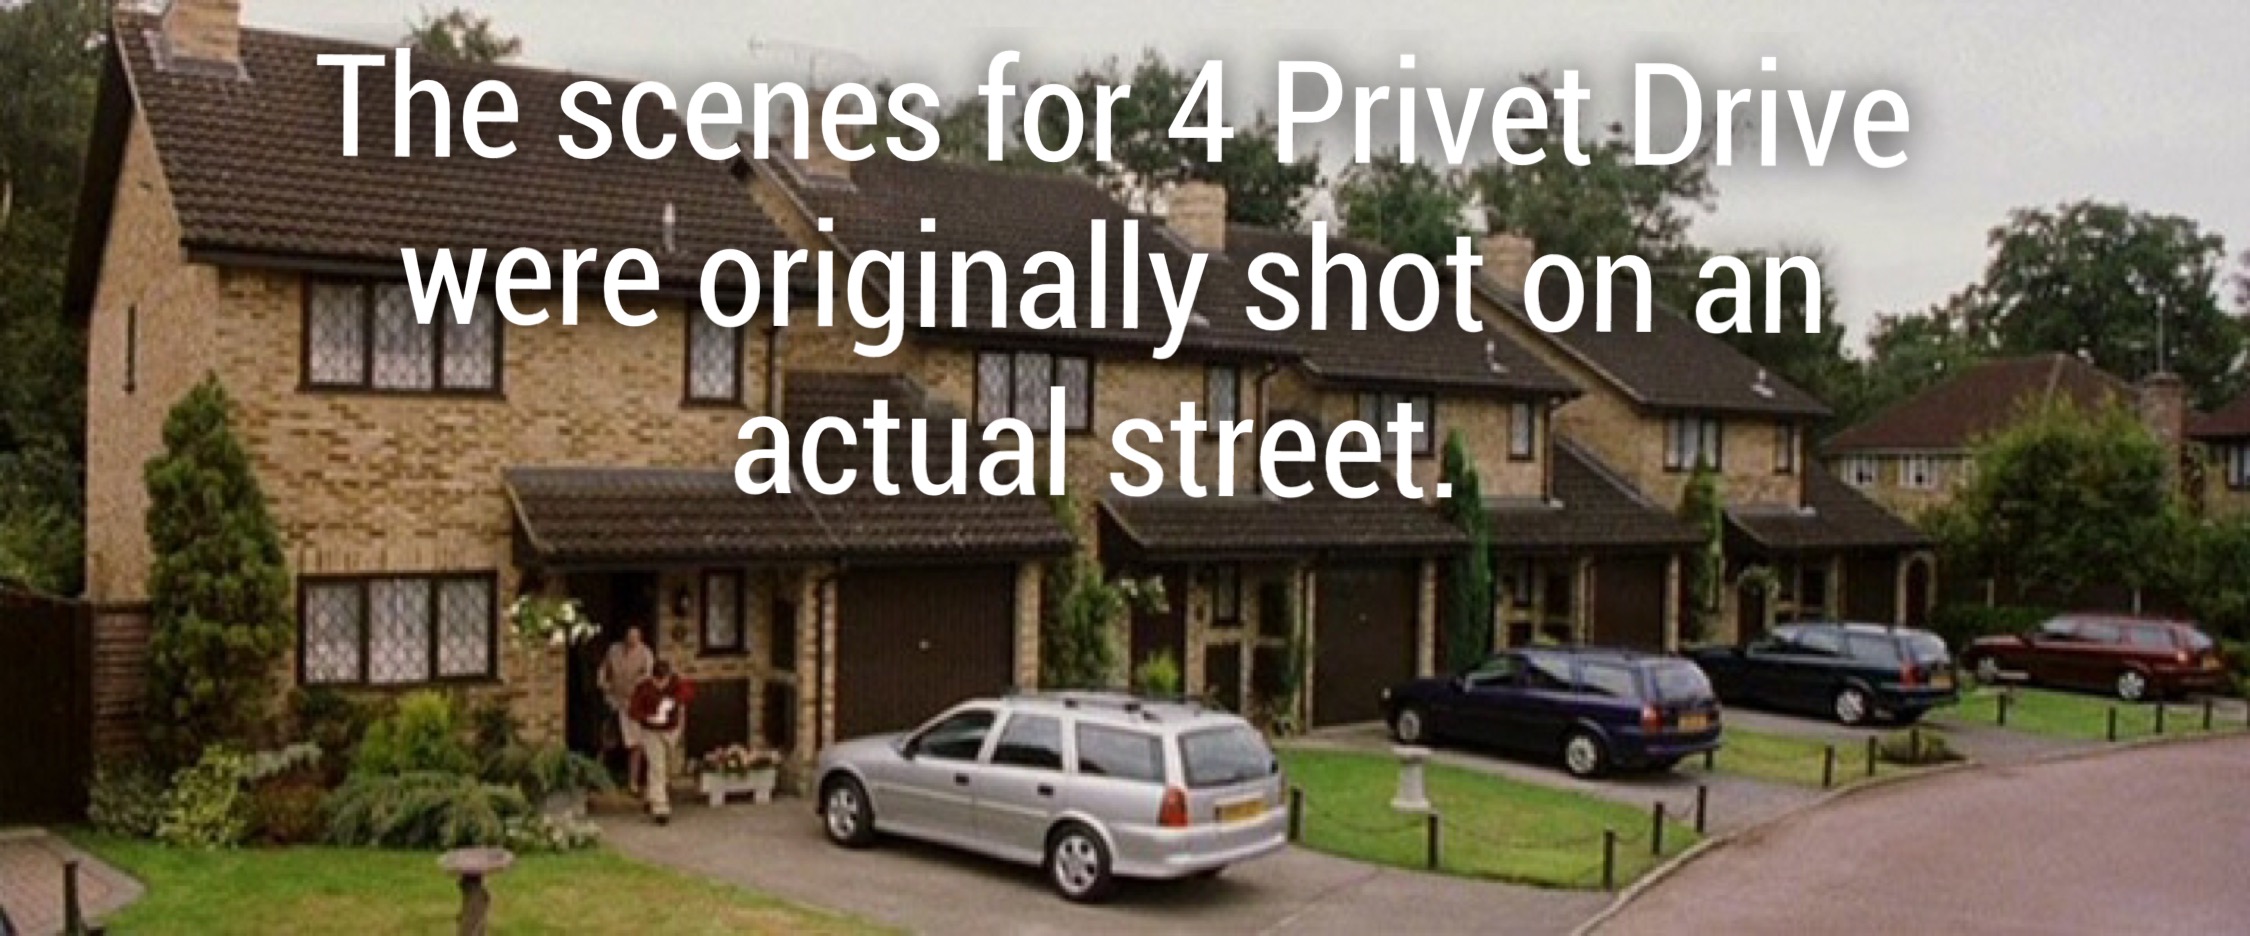 little whinging harry potter - The scenes for 4 Privet Drive were originally shot on an actual street."